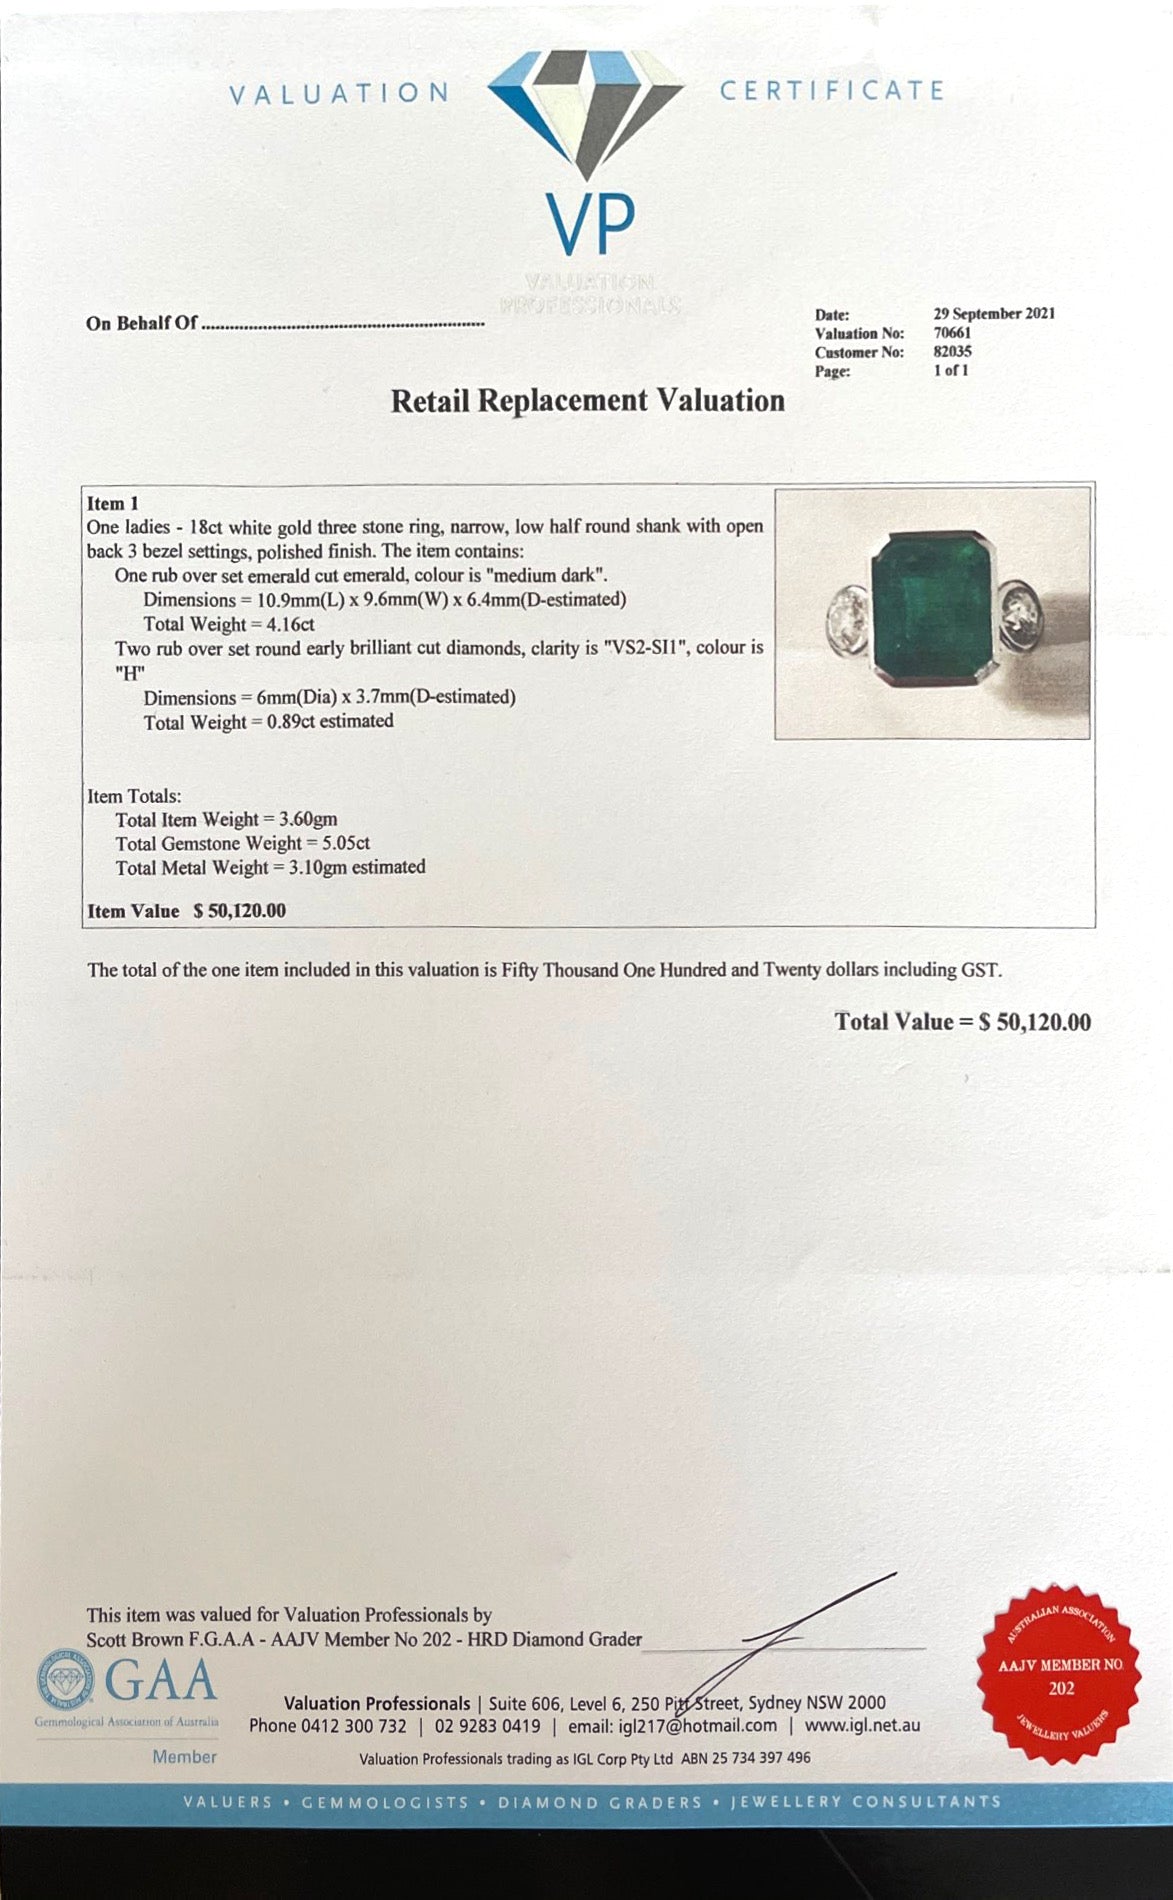 18CT white gold emerald and diamond ring